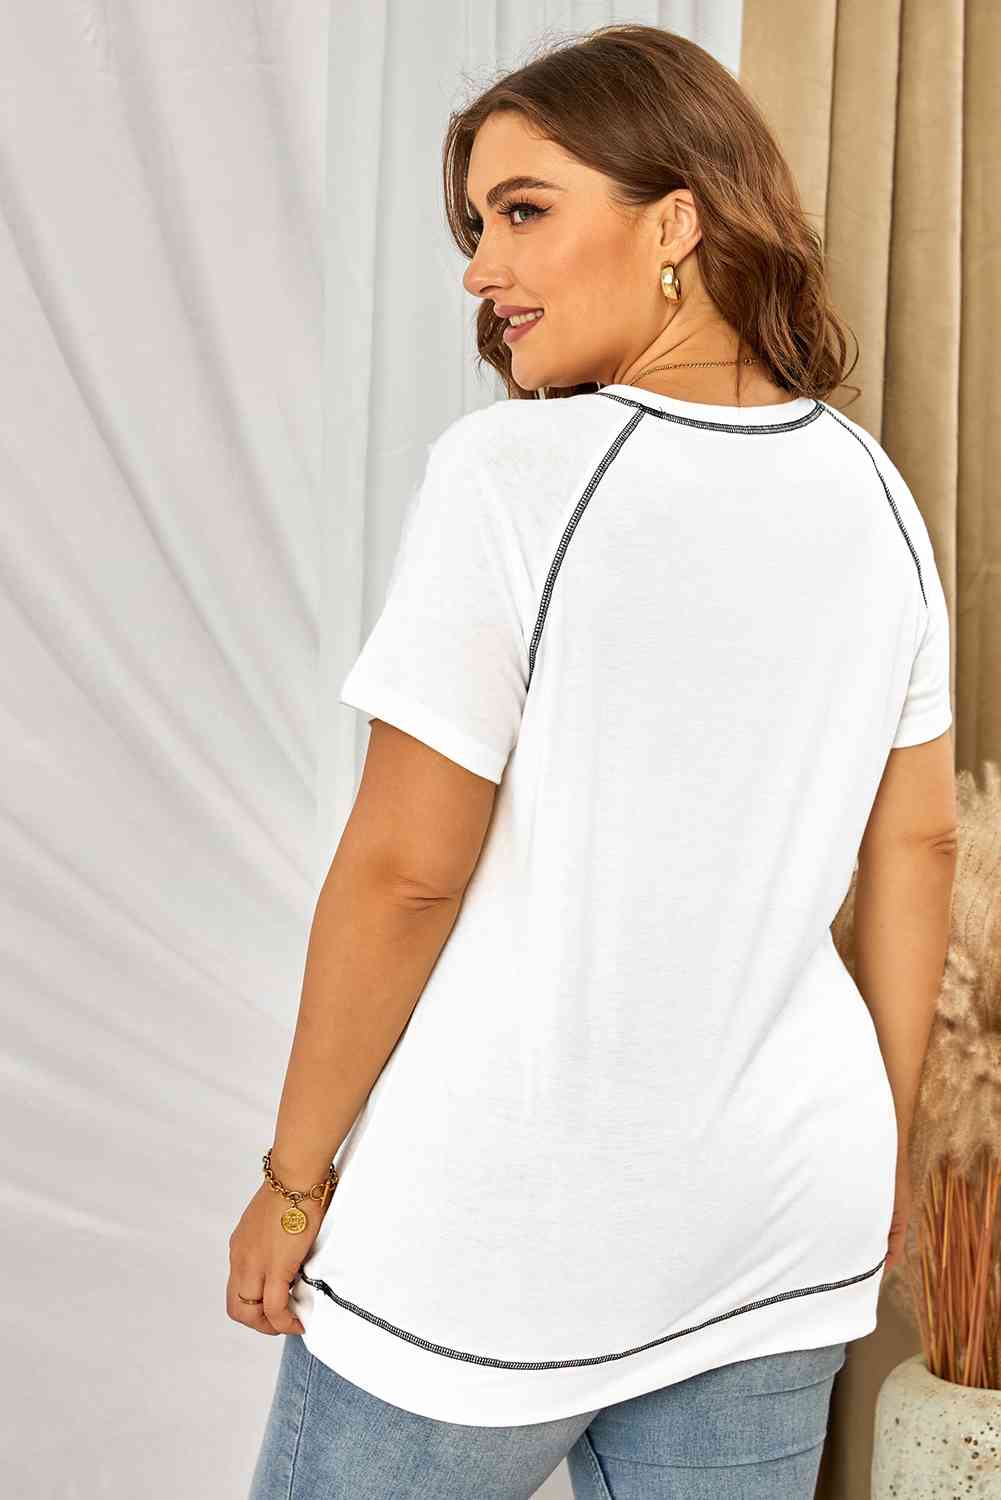 Plus Size Contrast Stitching Crewneck Tee - Shop Tophatter Deals, Electronics, Fashion, Jewelry, Health, Beauty, Home Decor, Free Shipping